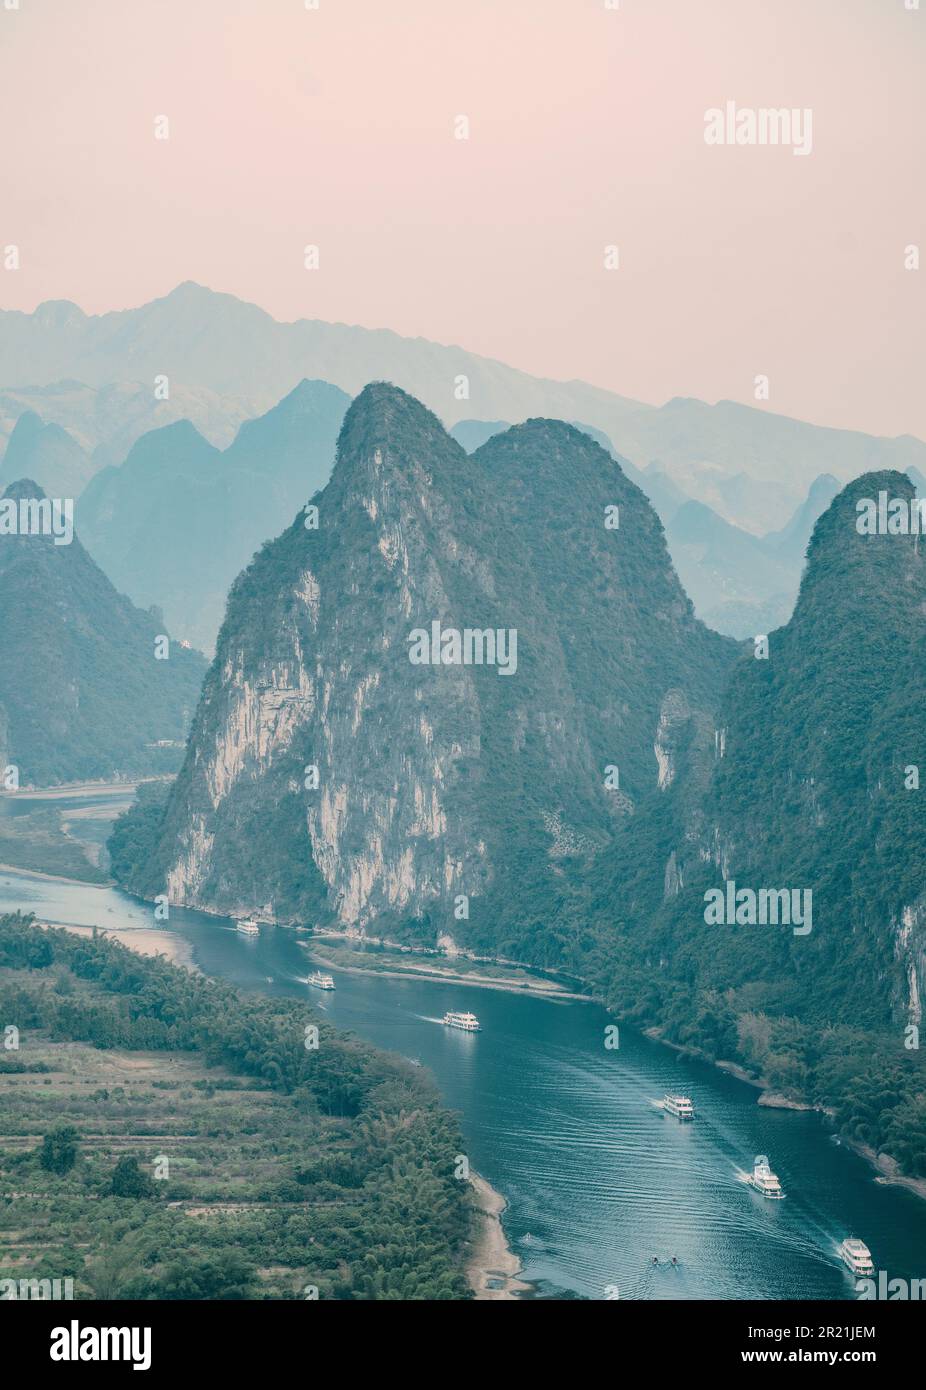 Aerial view of the stunning Lijiang River in the Guilin region of the Guangxi Zhuang Autonomous Region in China, Asia Stock Photo